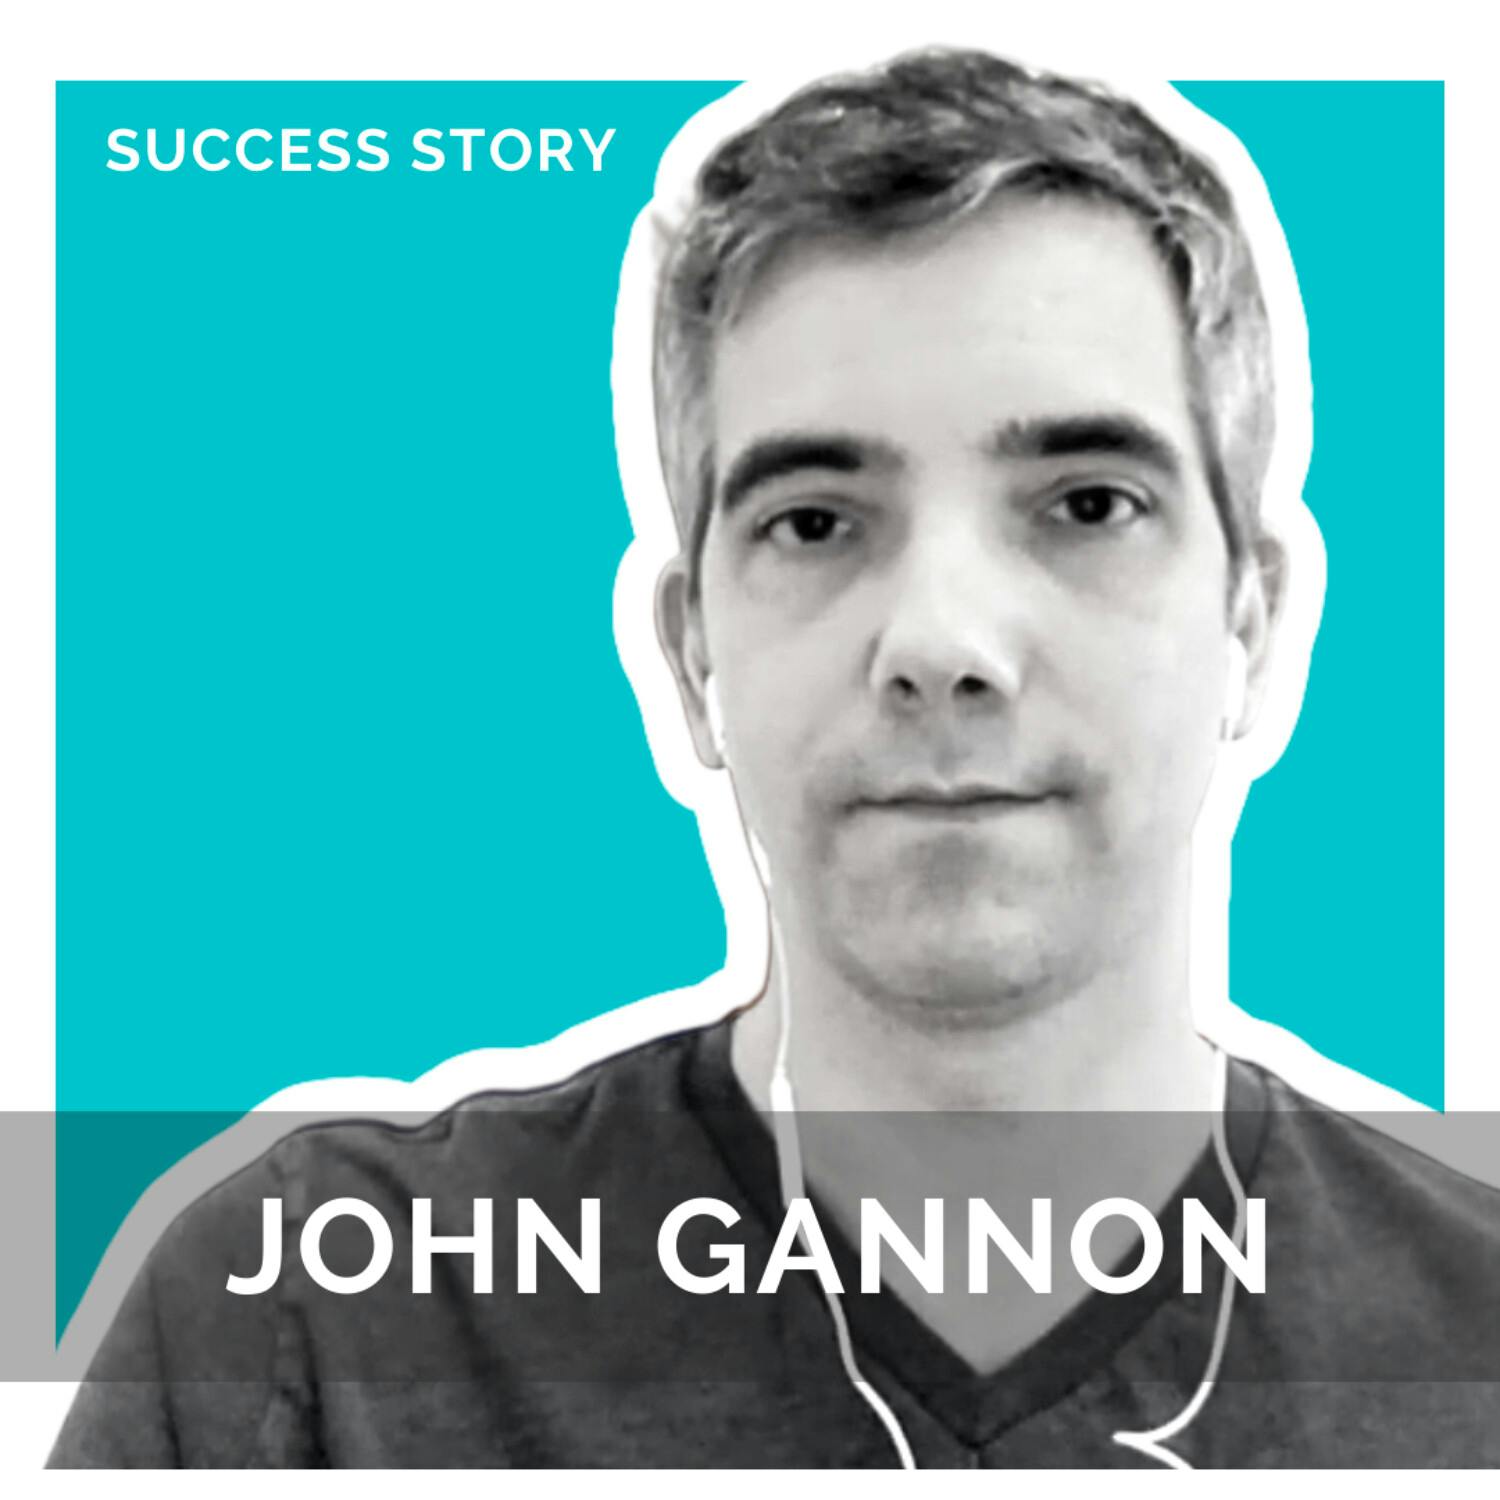 John Gannon, Co-Founder of Going VC | How To Get A Job In Venture Capital